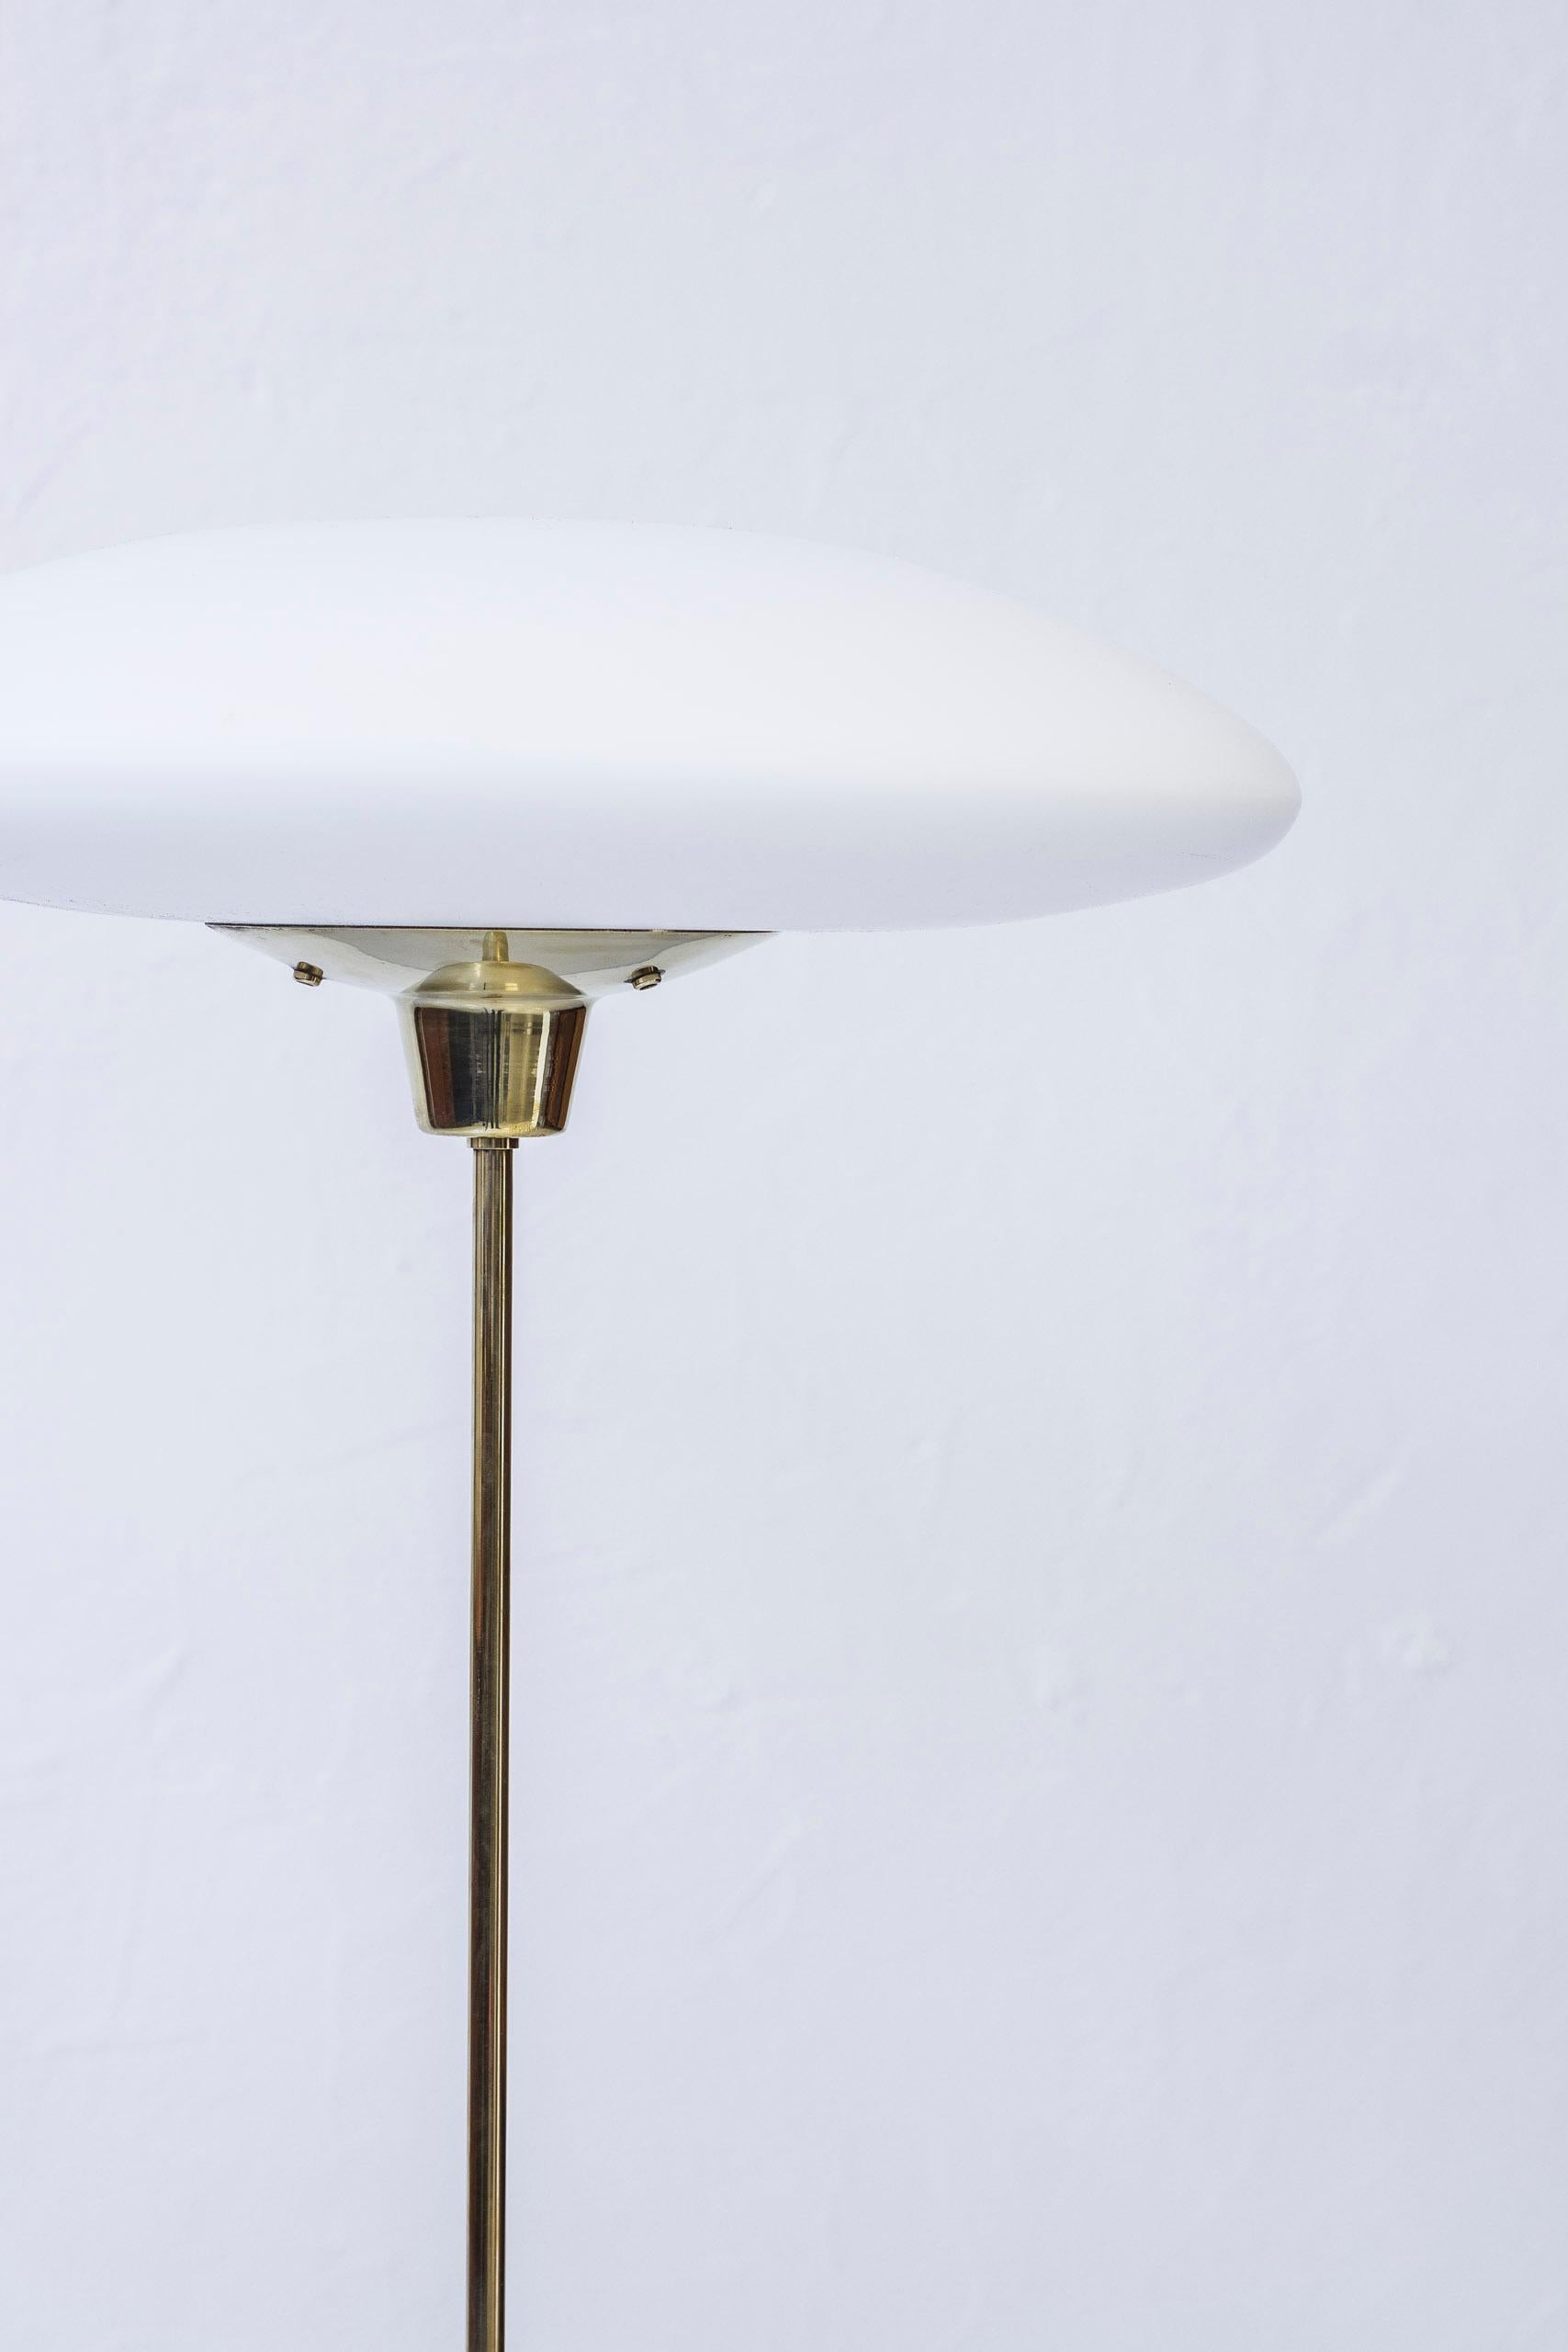 Mid-20th Century Swedish Floor Lamp in Brass by ASEA Belysning, 1950s